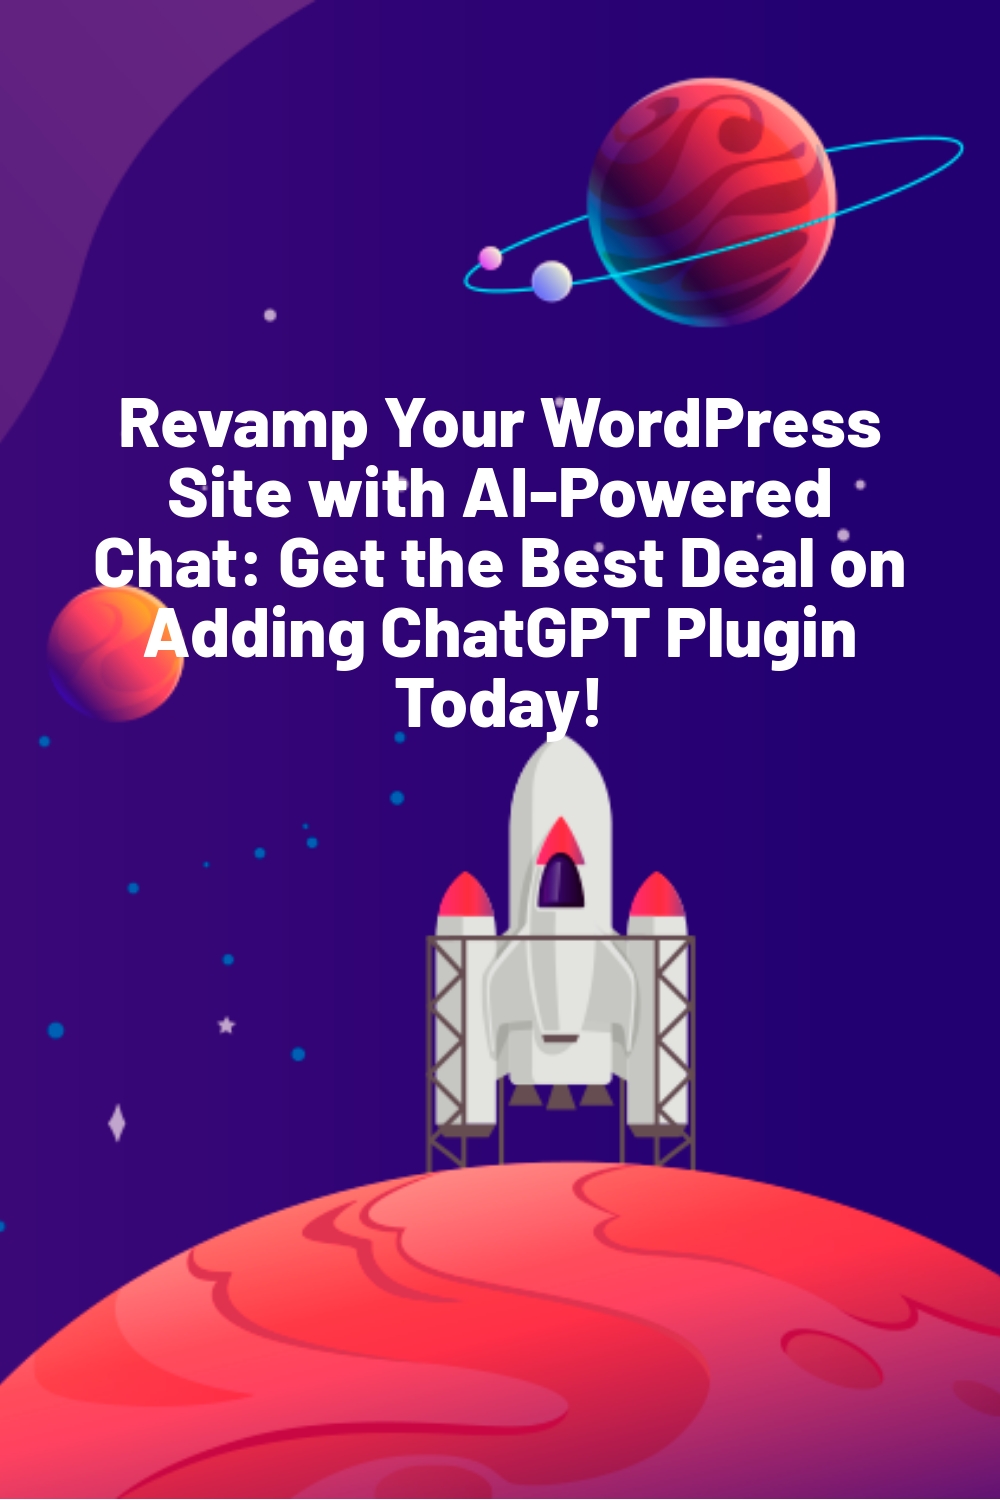 Revamp Your WordPress Site with AI-Powered Chat: Get the Best Deal on Adding ChatGPT Plugin Today!